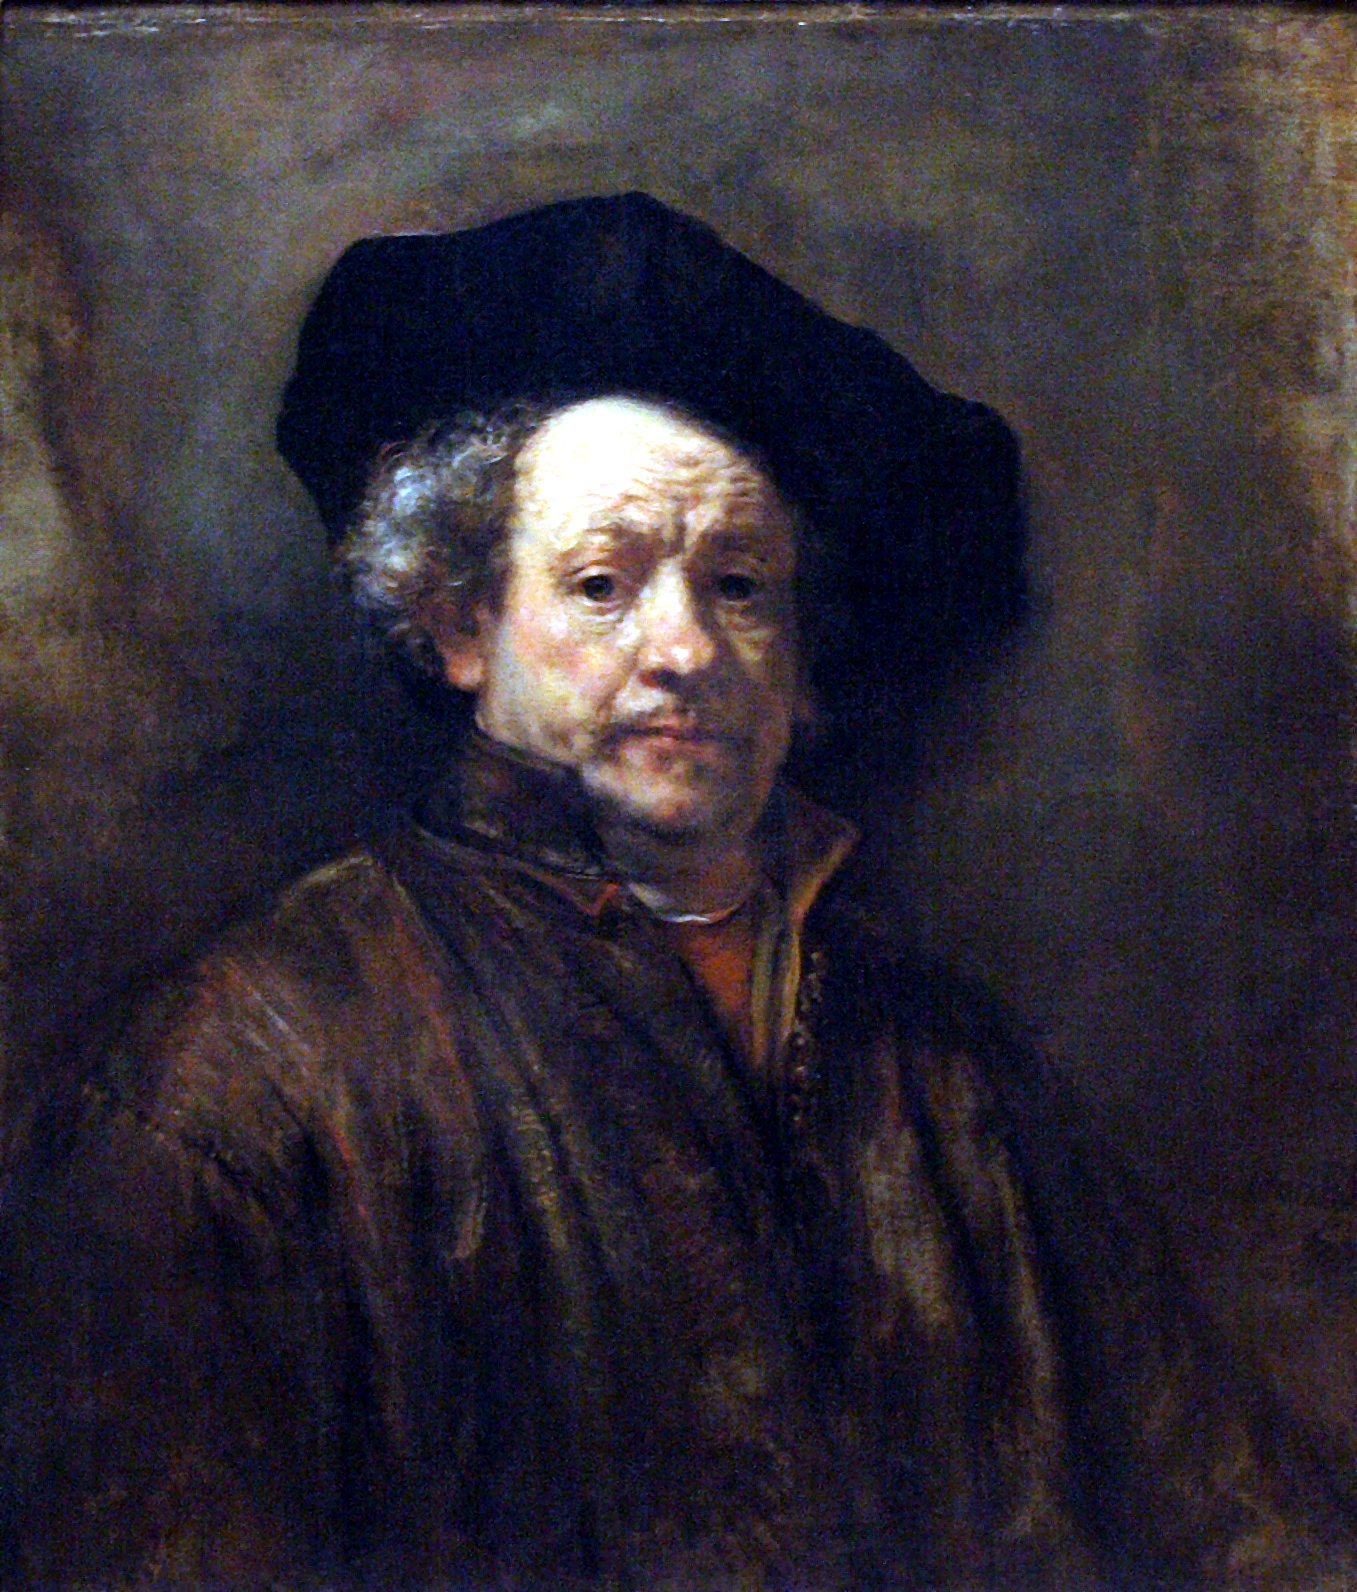 A portrait of a man in a beret